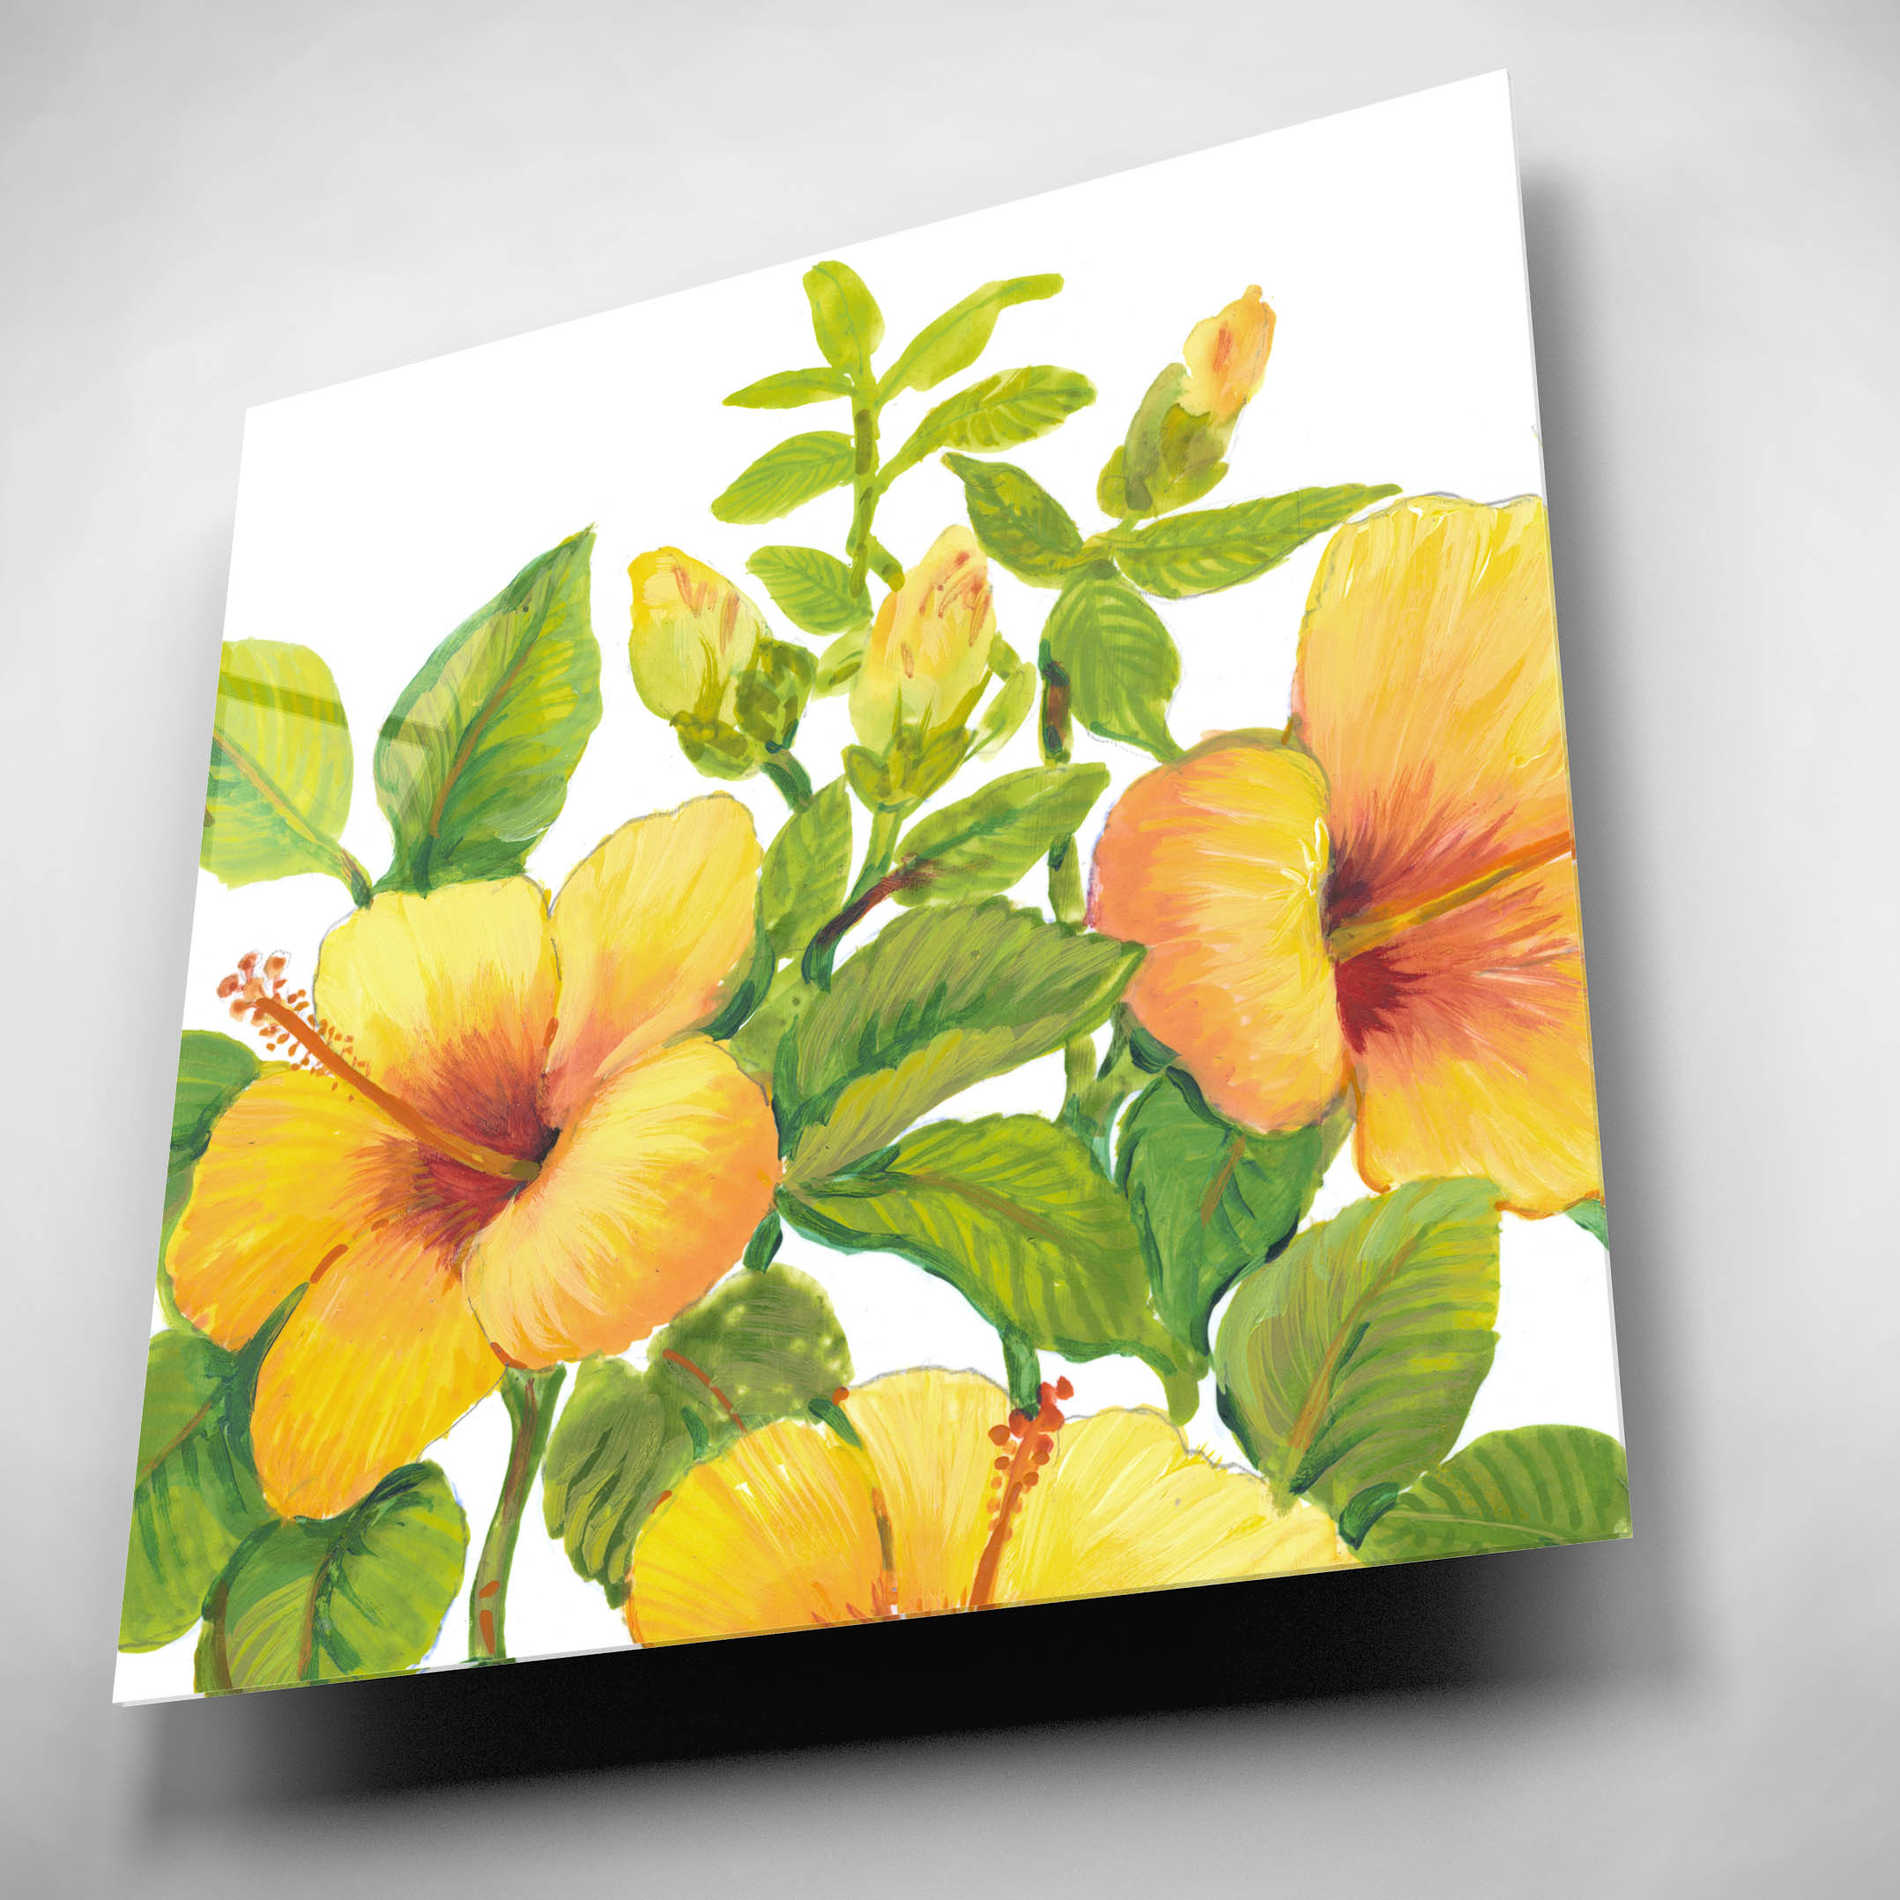 Epic Art 'Watercolor Hibiscus I' by Tim O'Toole, Acrylic Glass Wall Art,12x12